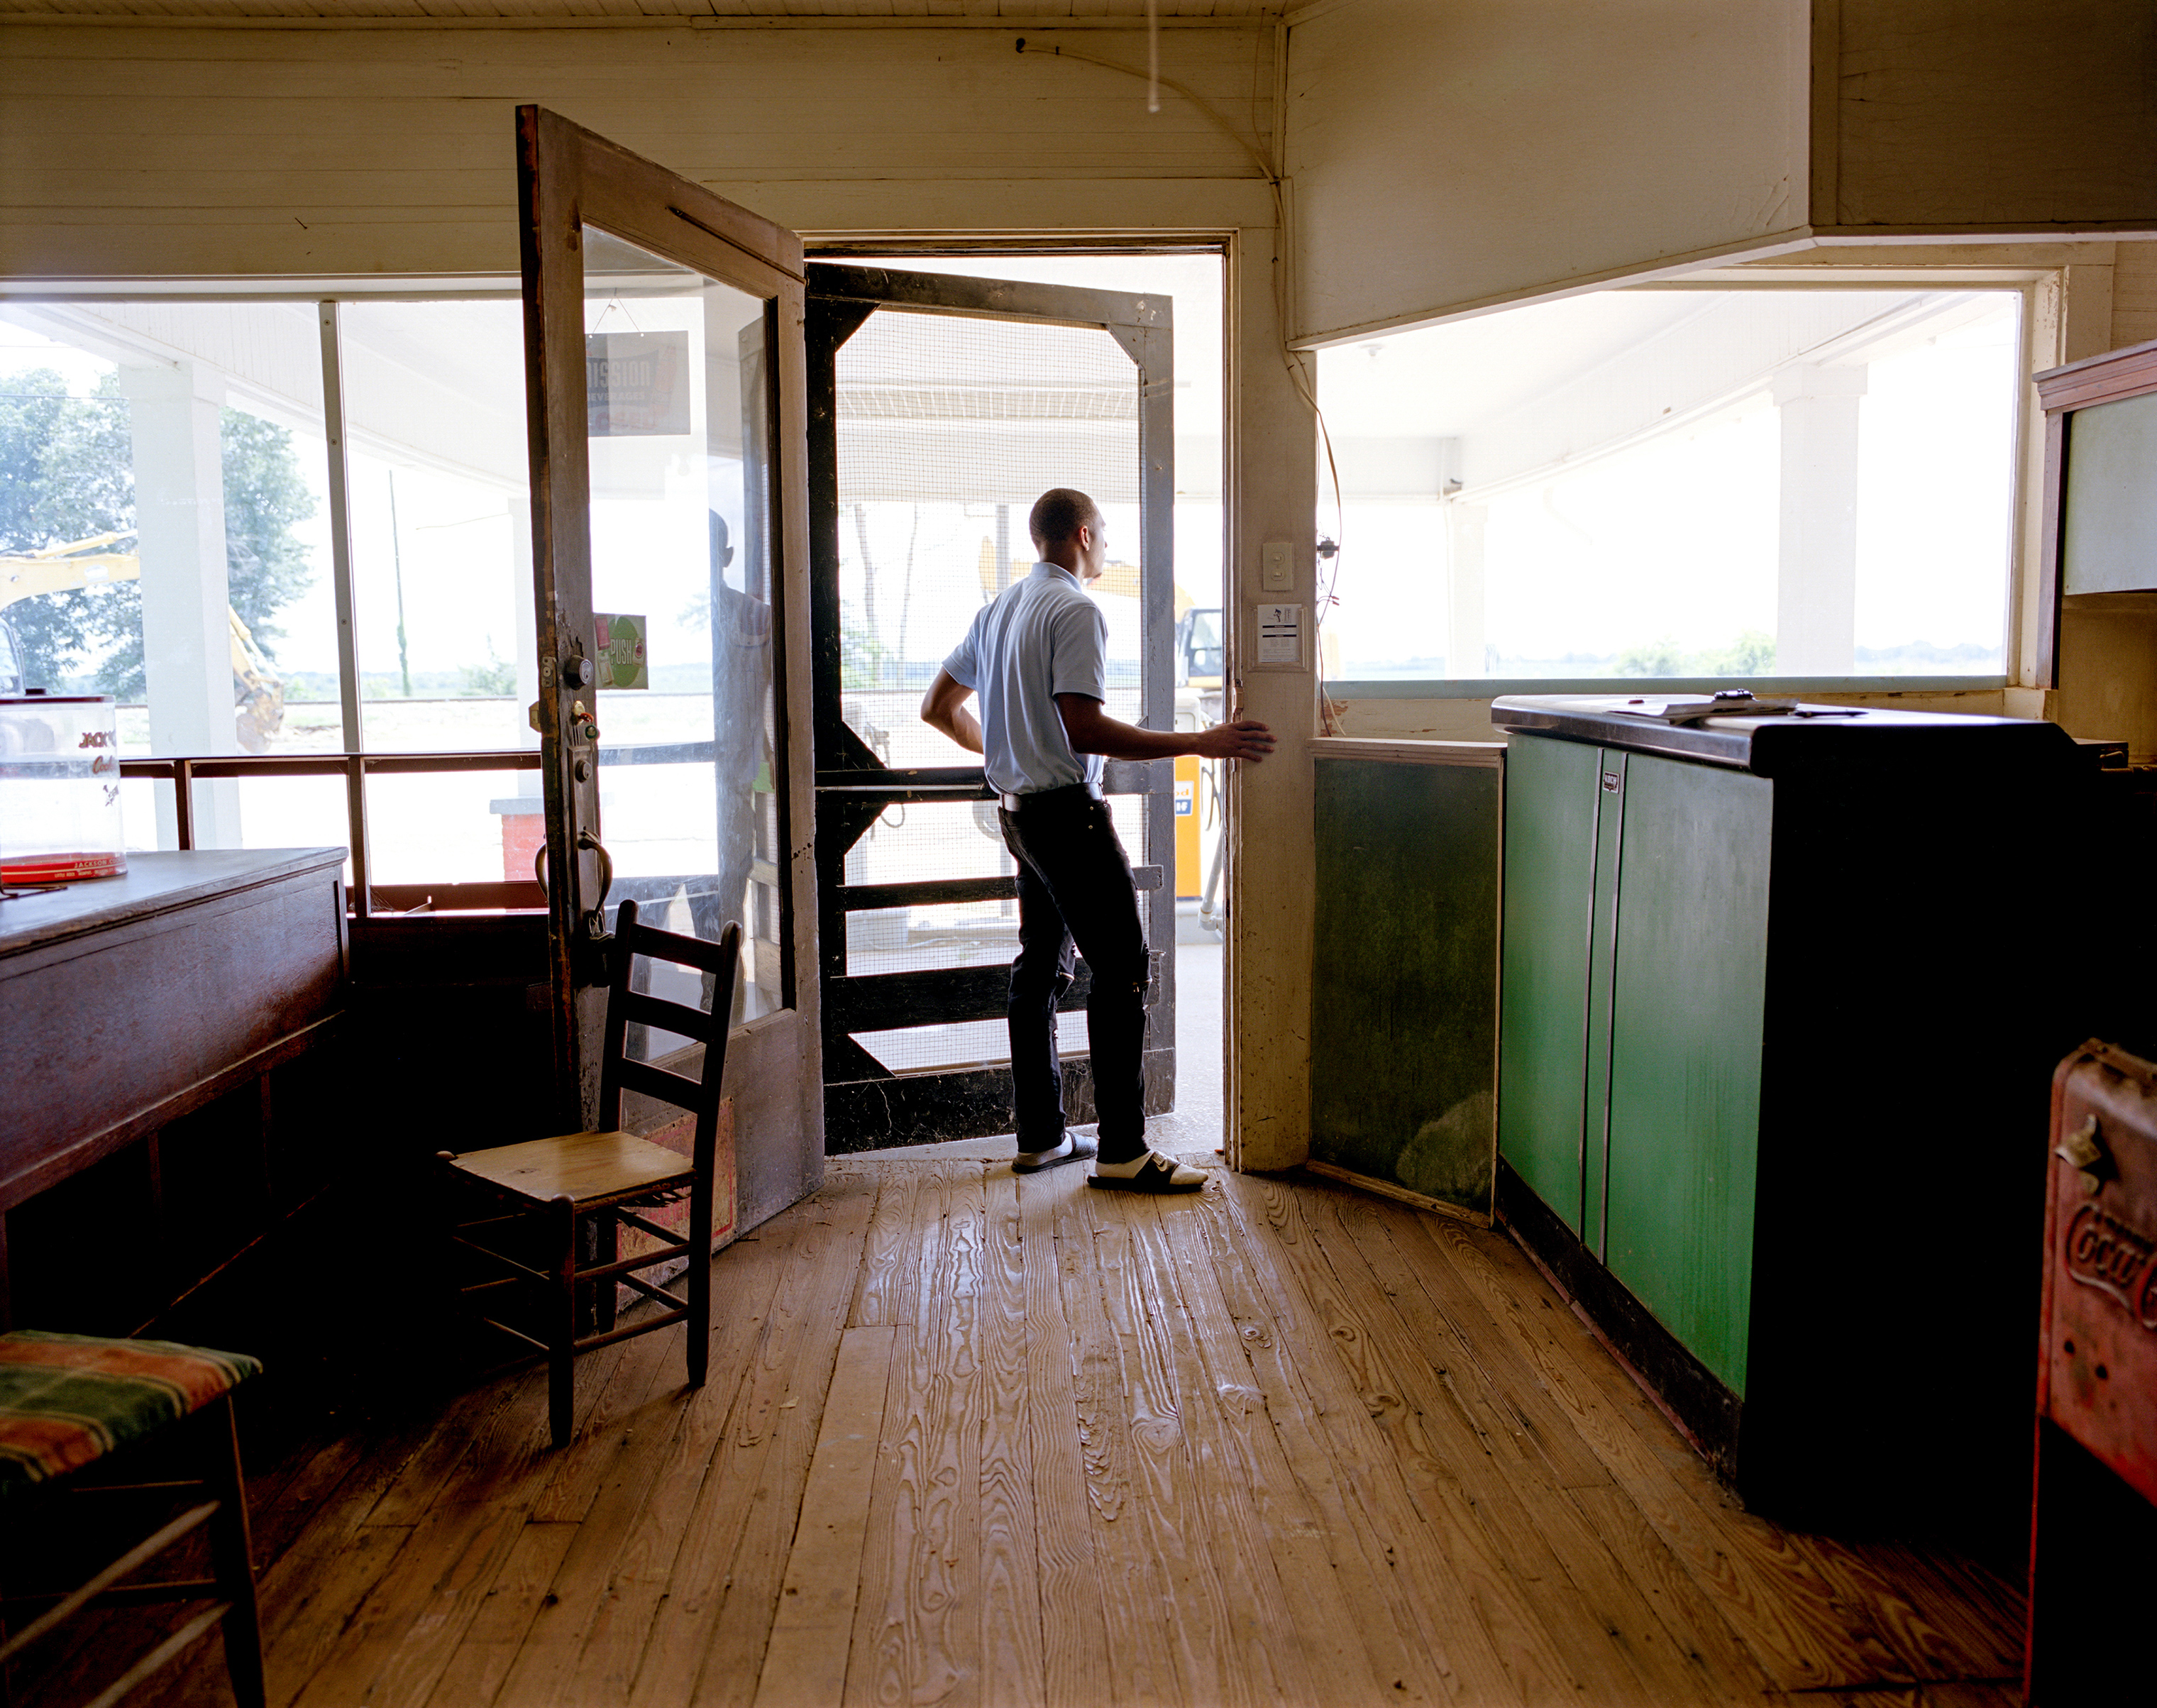 Rodkevian Thomas, an intern with the Emmett Till Interpretive Center, visits the restored service station adjacent to the dilapidated Bryant's Grocery in Money, Miss. On August 24, 1955, 14-year-old Emmett Till was visiting Bryant’s Grocery when he was accused of violating the racial customs of the time by whistling at a white woman. He was then kidnapped, beaten and, on Aug. 28, lynched. (Johnathon Kelso)